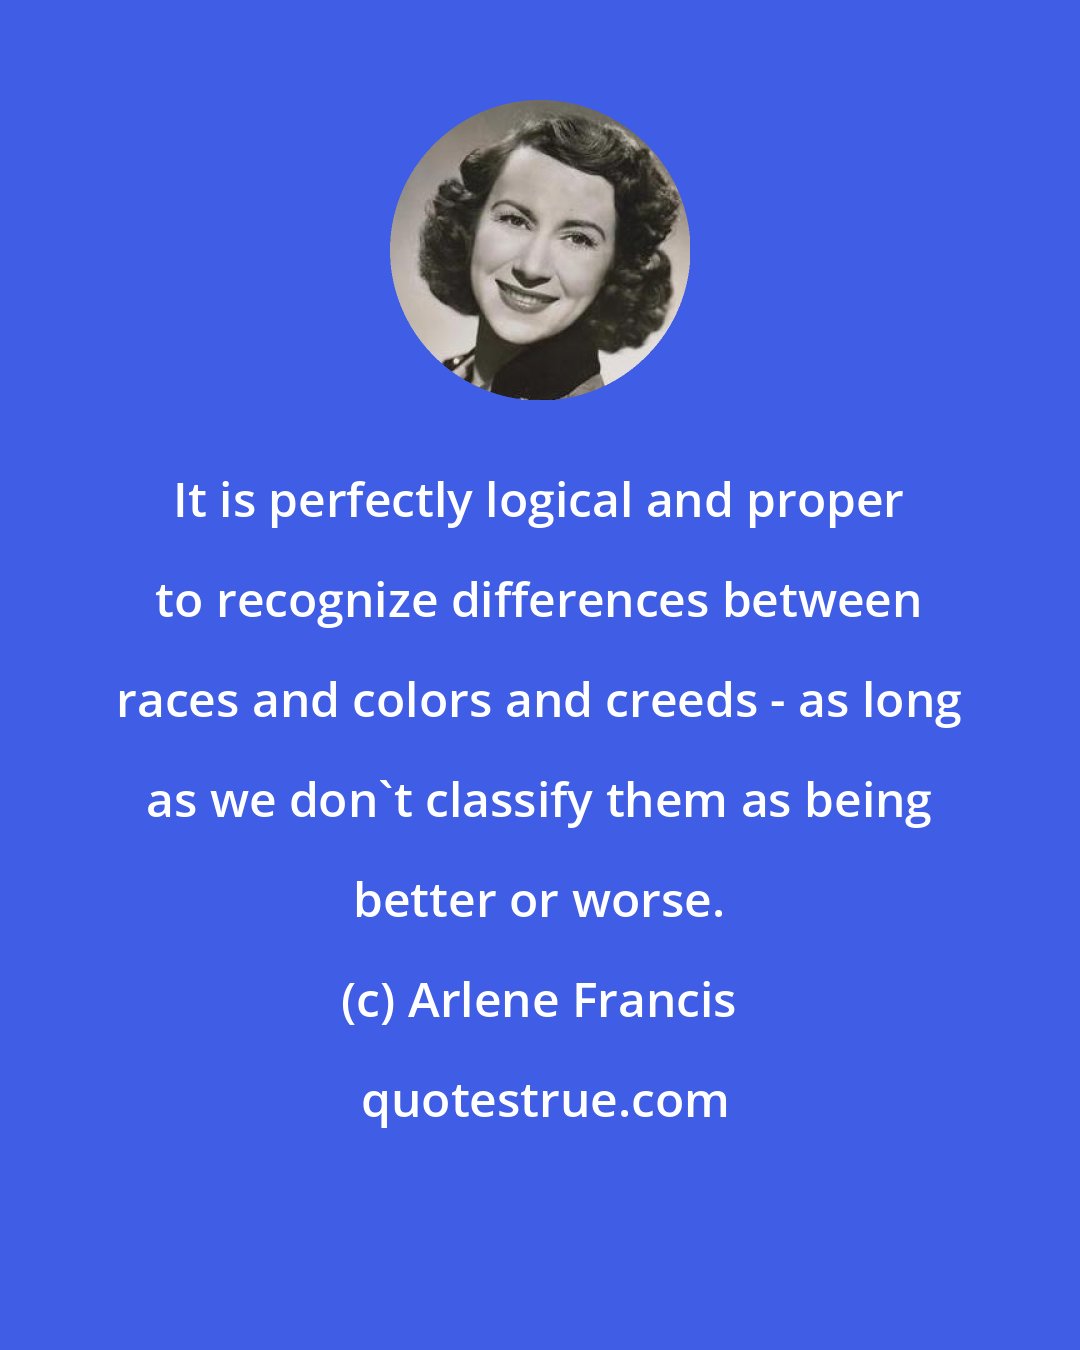 Arlene Francis: It is perfectly logical and proper to recognize differences between races and colors and creeds - as long as we don't classify them as being better or worse.